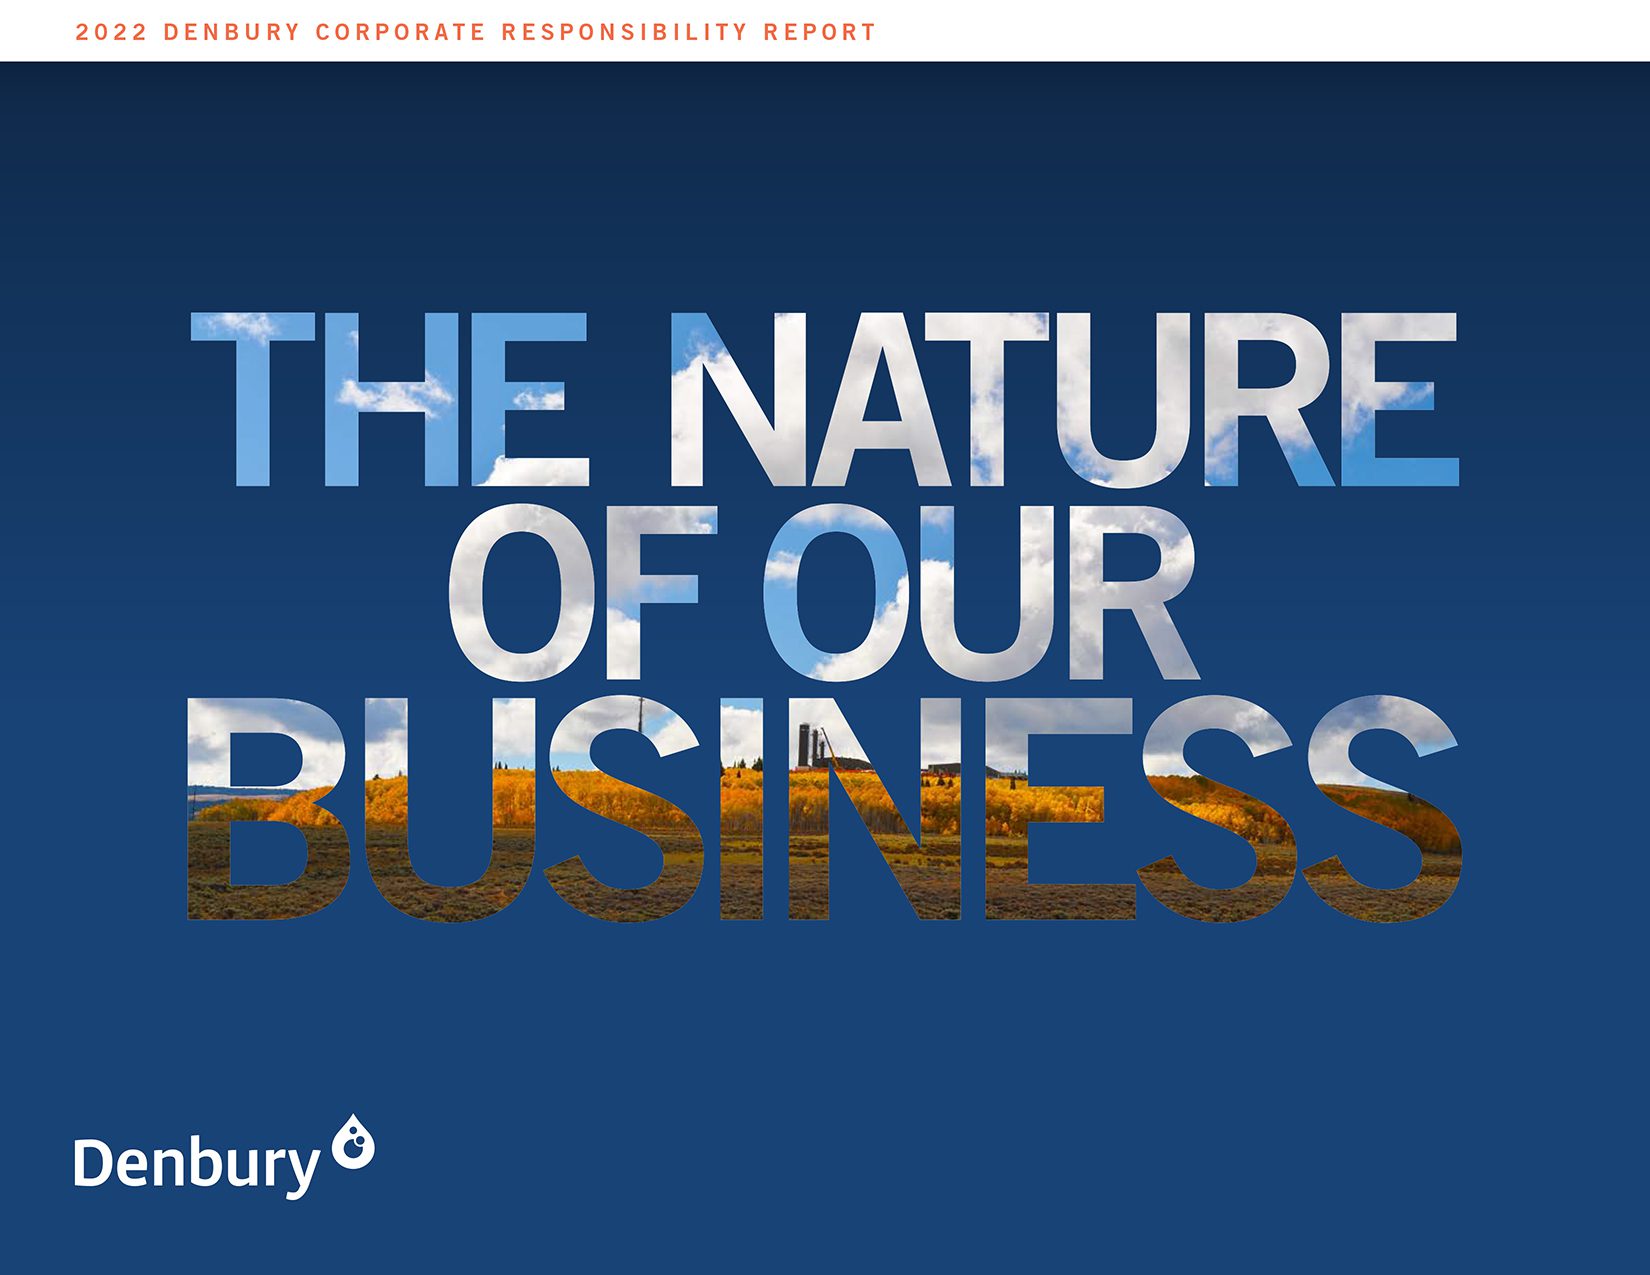 For more information on how Denbury is powering the energy transition  with innovative carbon solutions, see our Operations page and our 2022 Corporate Responsibility Report. 